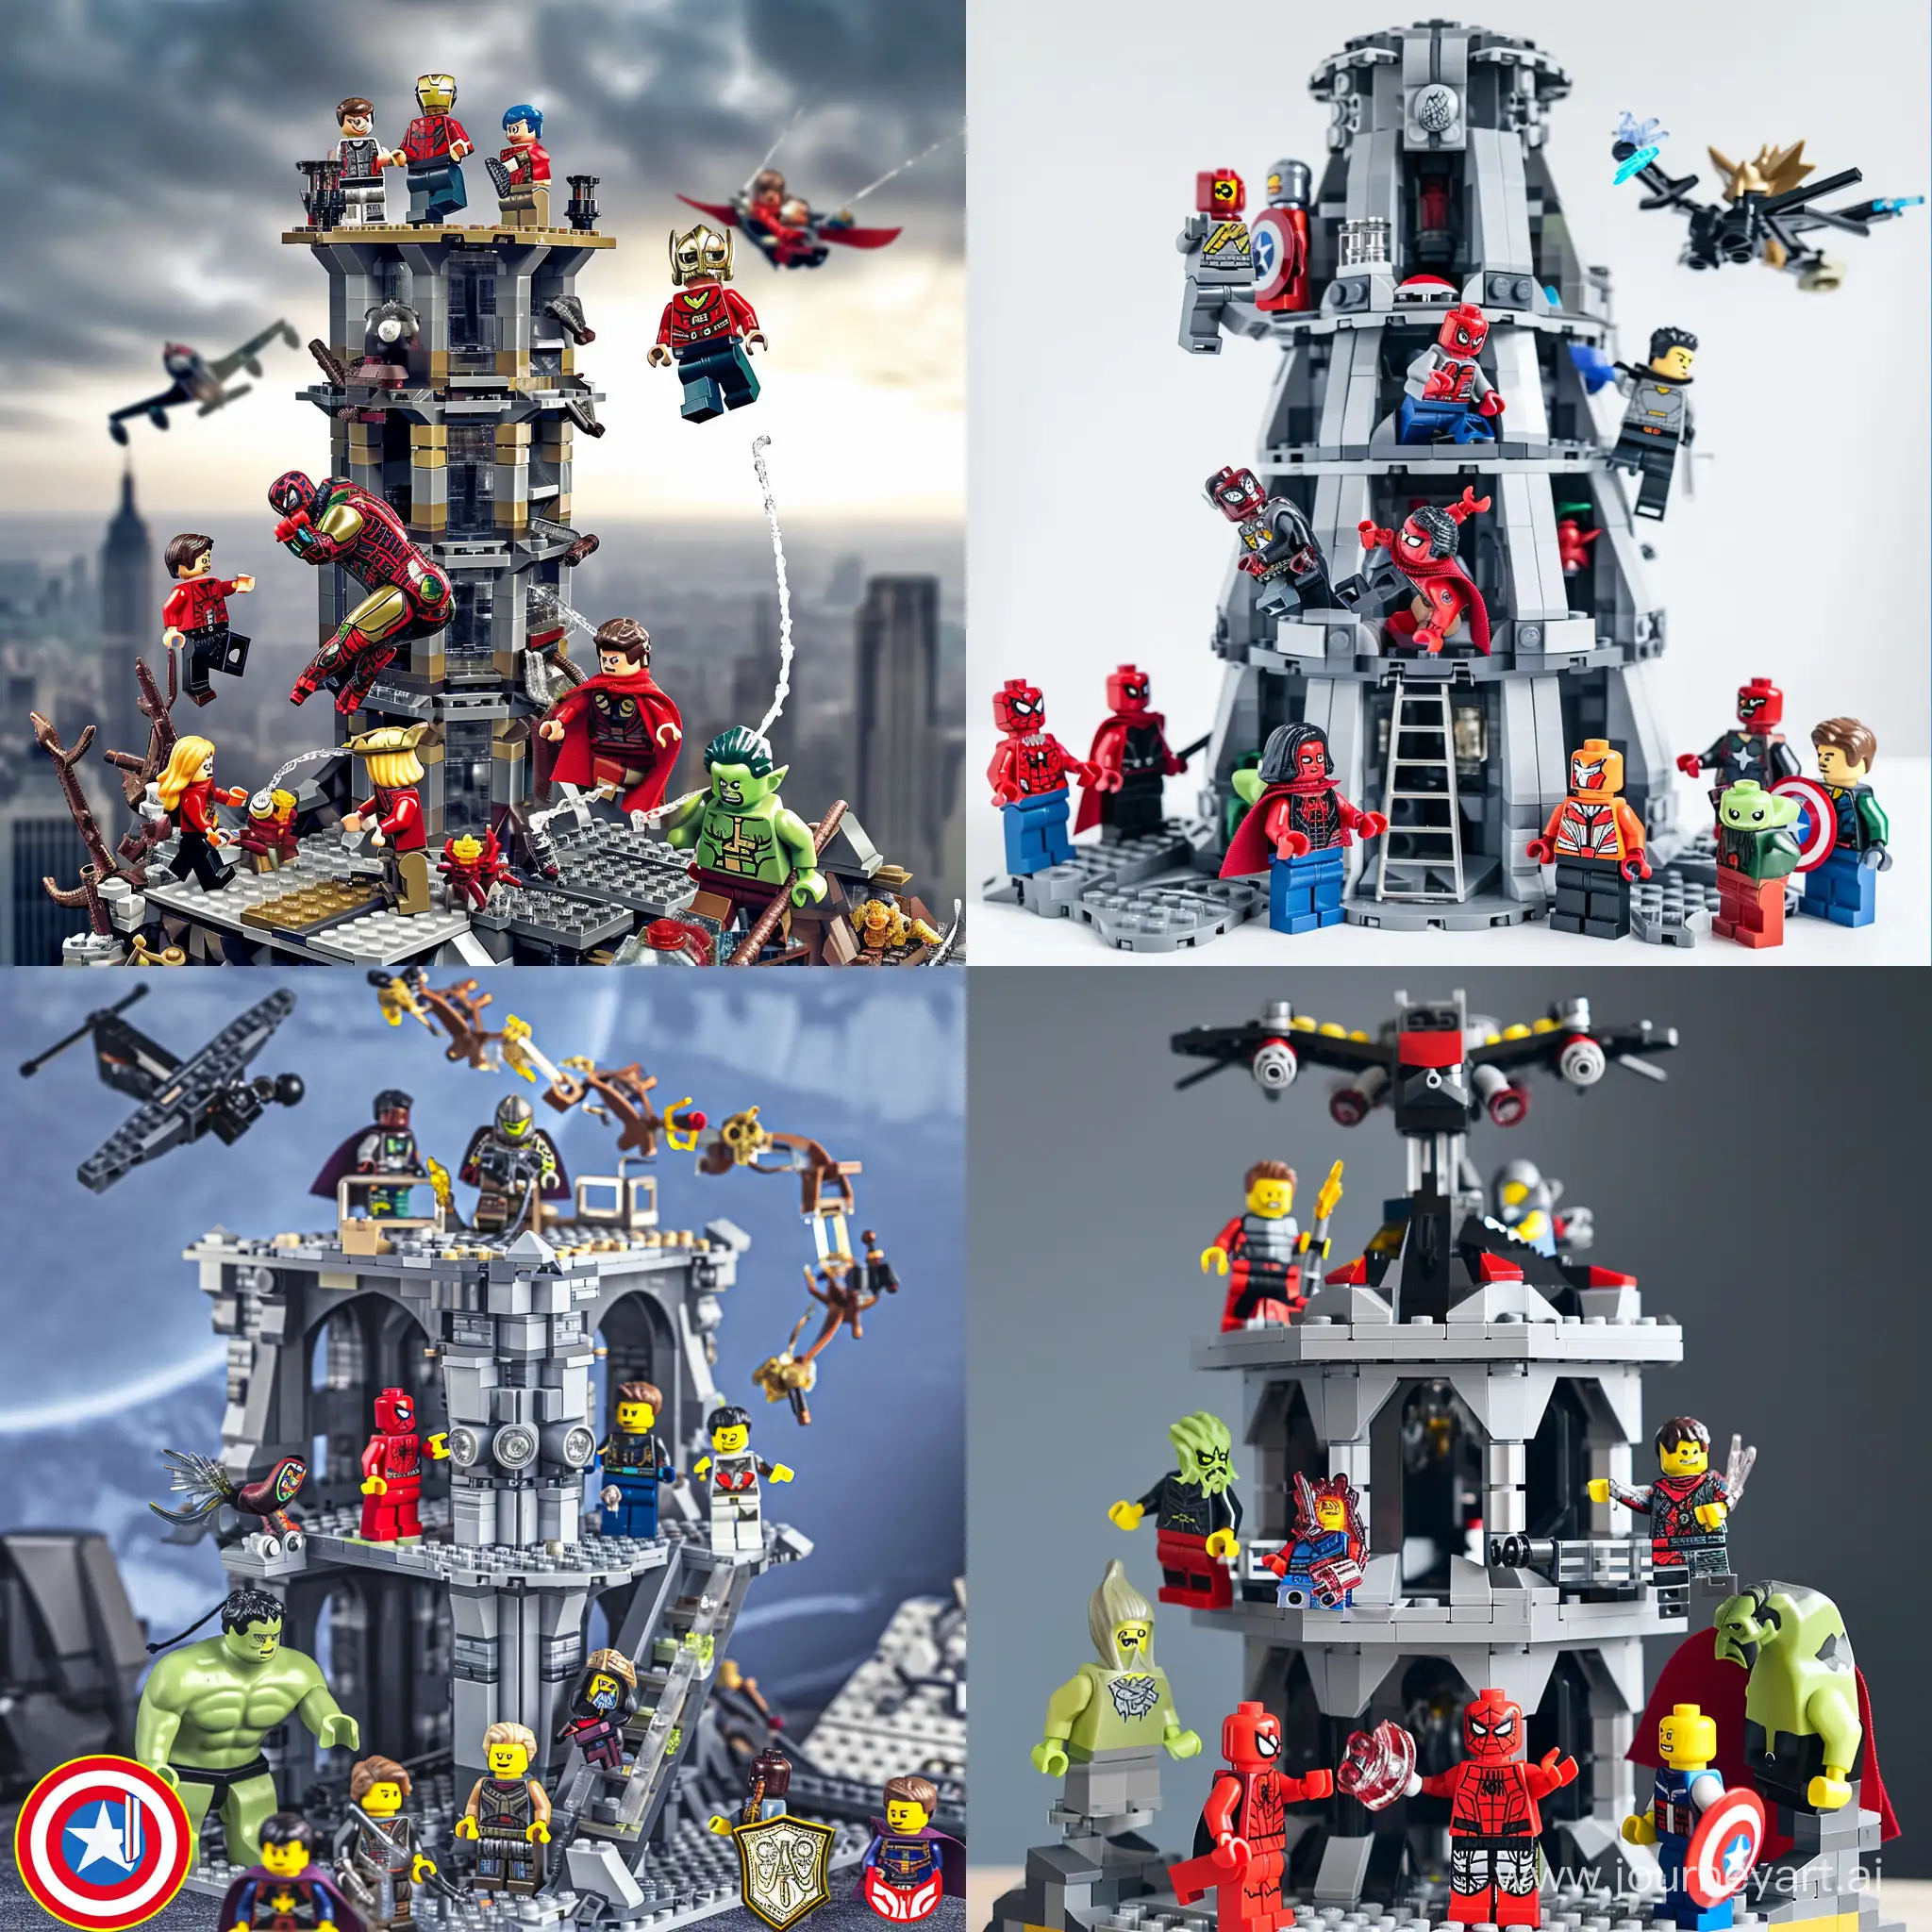 Epic-Marvel-Lego-Battle-for-Avengers-Tower-Set-with-SpiderMan-Iron-Man-and-Thanos